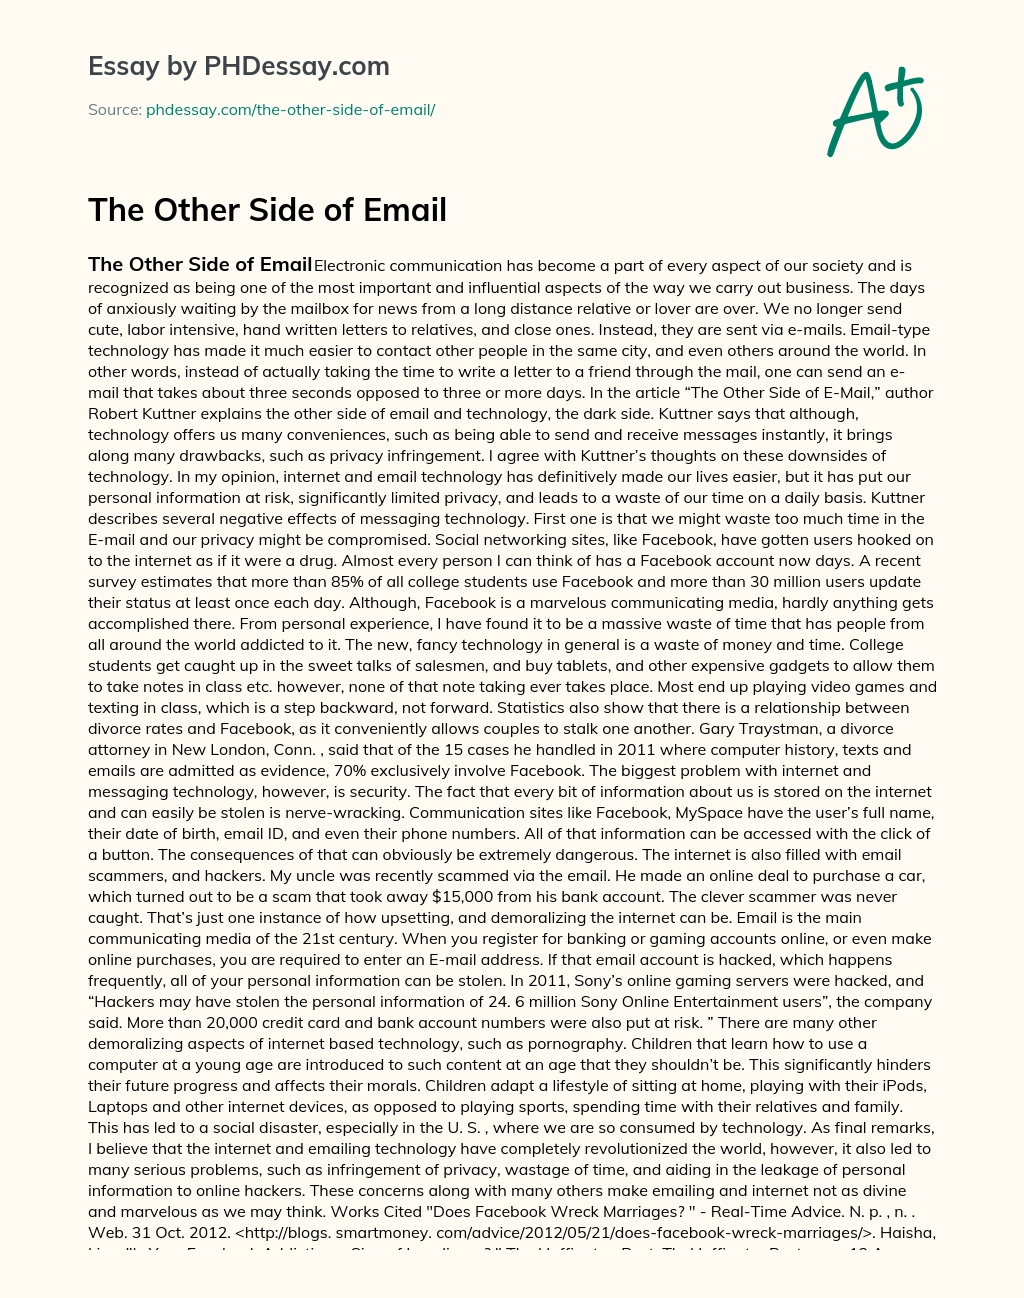 The Other Side of Email essay